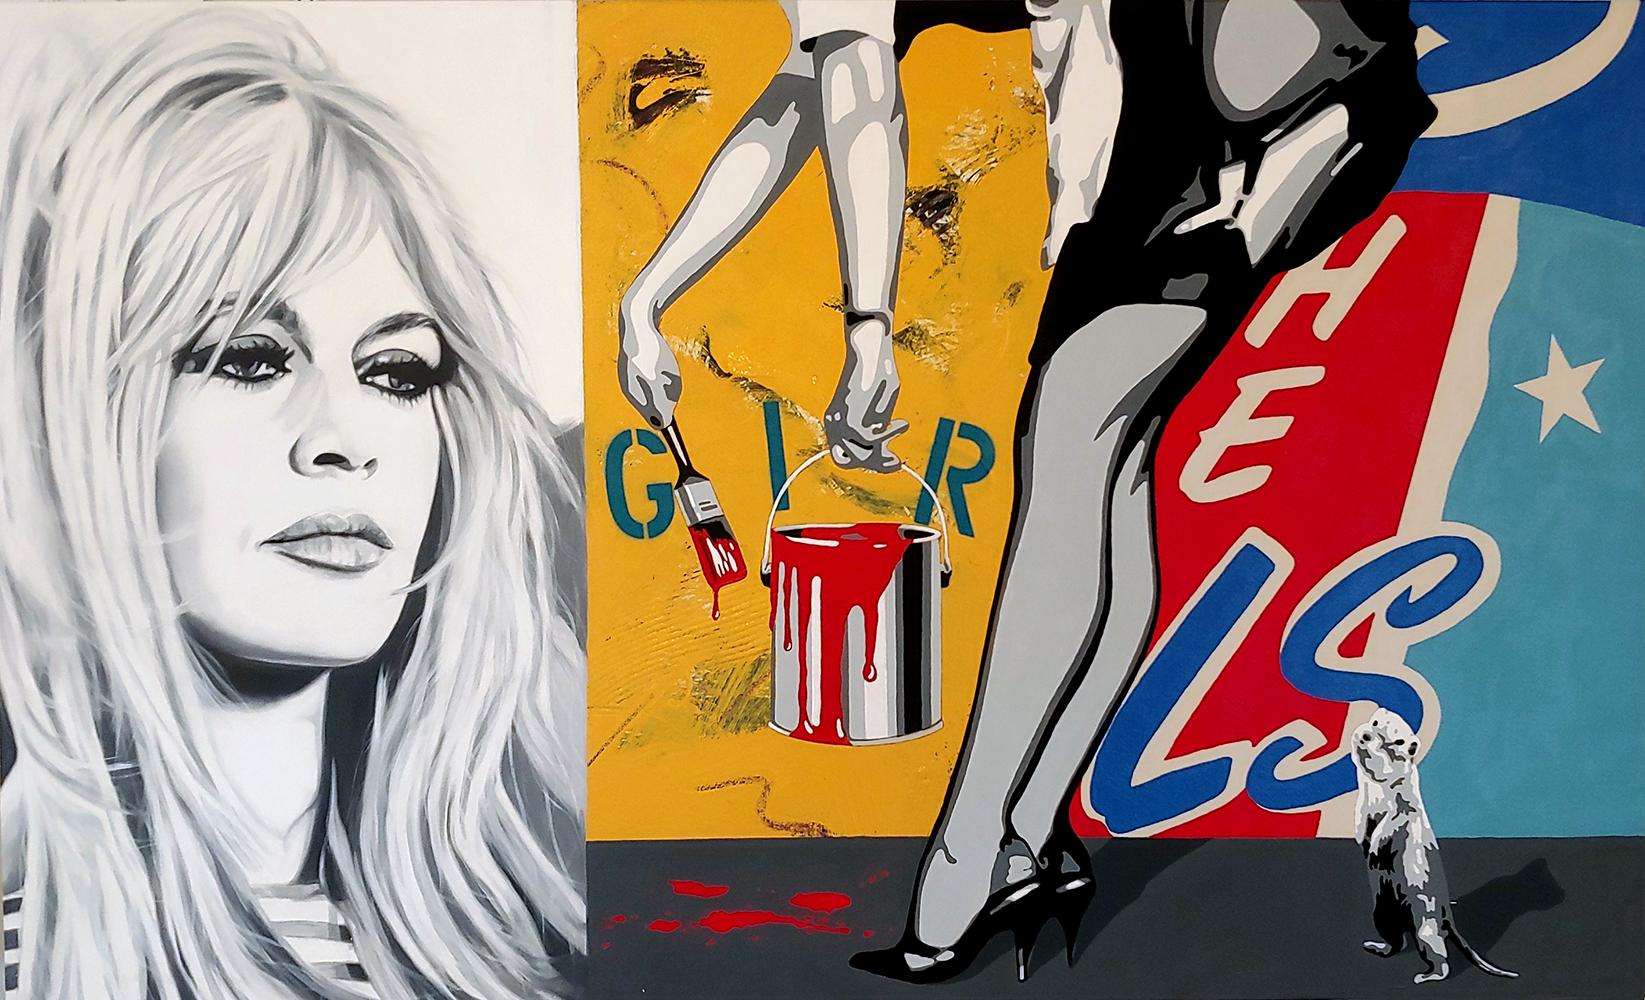 Ceravolo Figurative Painting - Bardot "French Style Girls" oil on canvas 36x60"